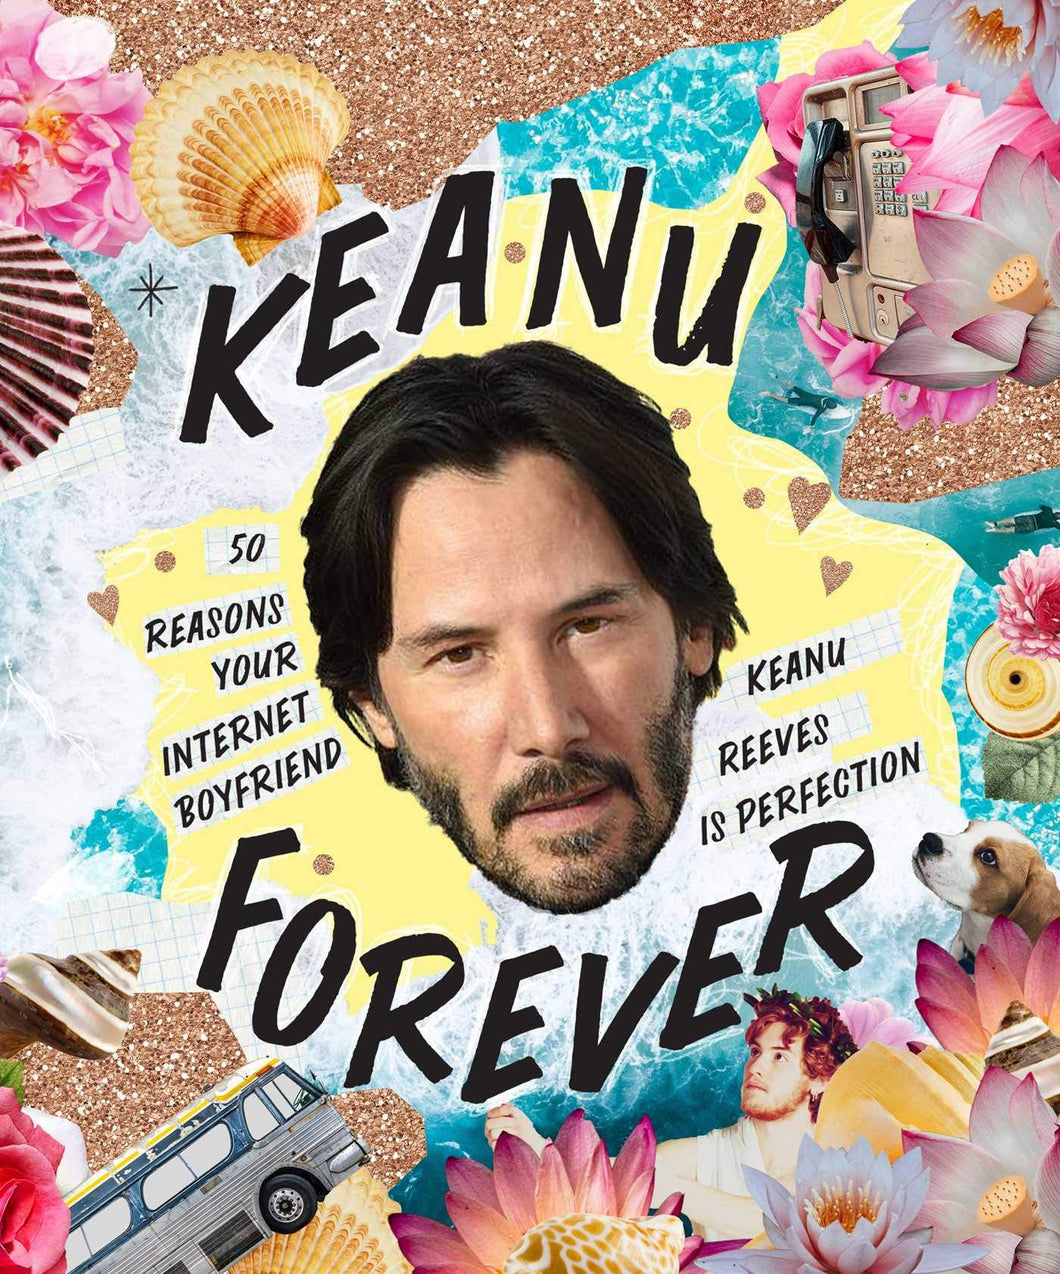 Keanu Forever: 50 Reasons Your Internet Boyfriend Keanu Reeves Is Perfection [Billie Oliver]